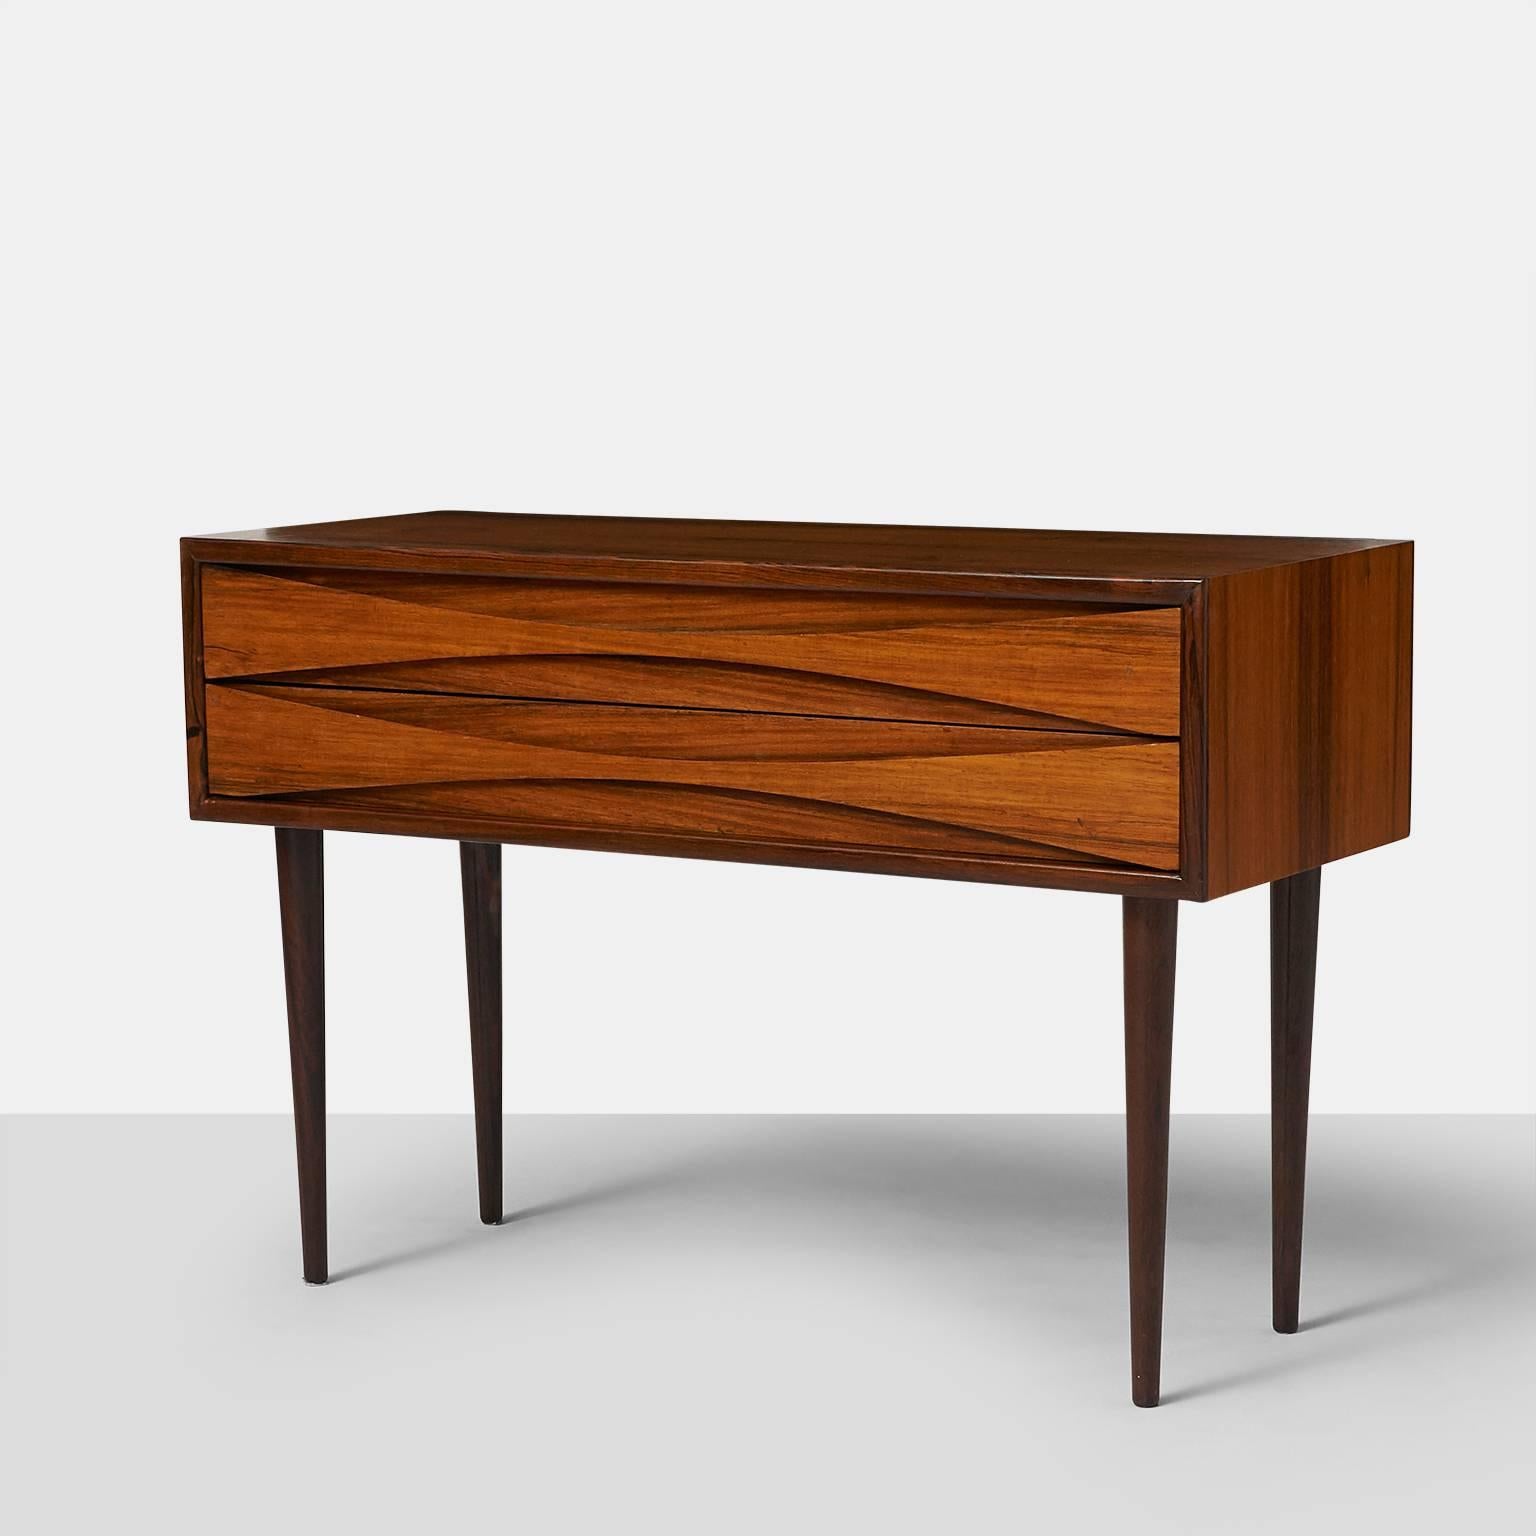 An elegant nightstand or side table with two drawers in Rosewood with bow tie drawer pulls on stiletto legs. Made by N.C. Mobler
Denmark, circa 1950s.